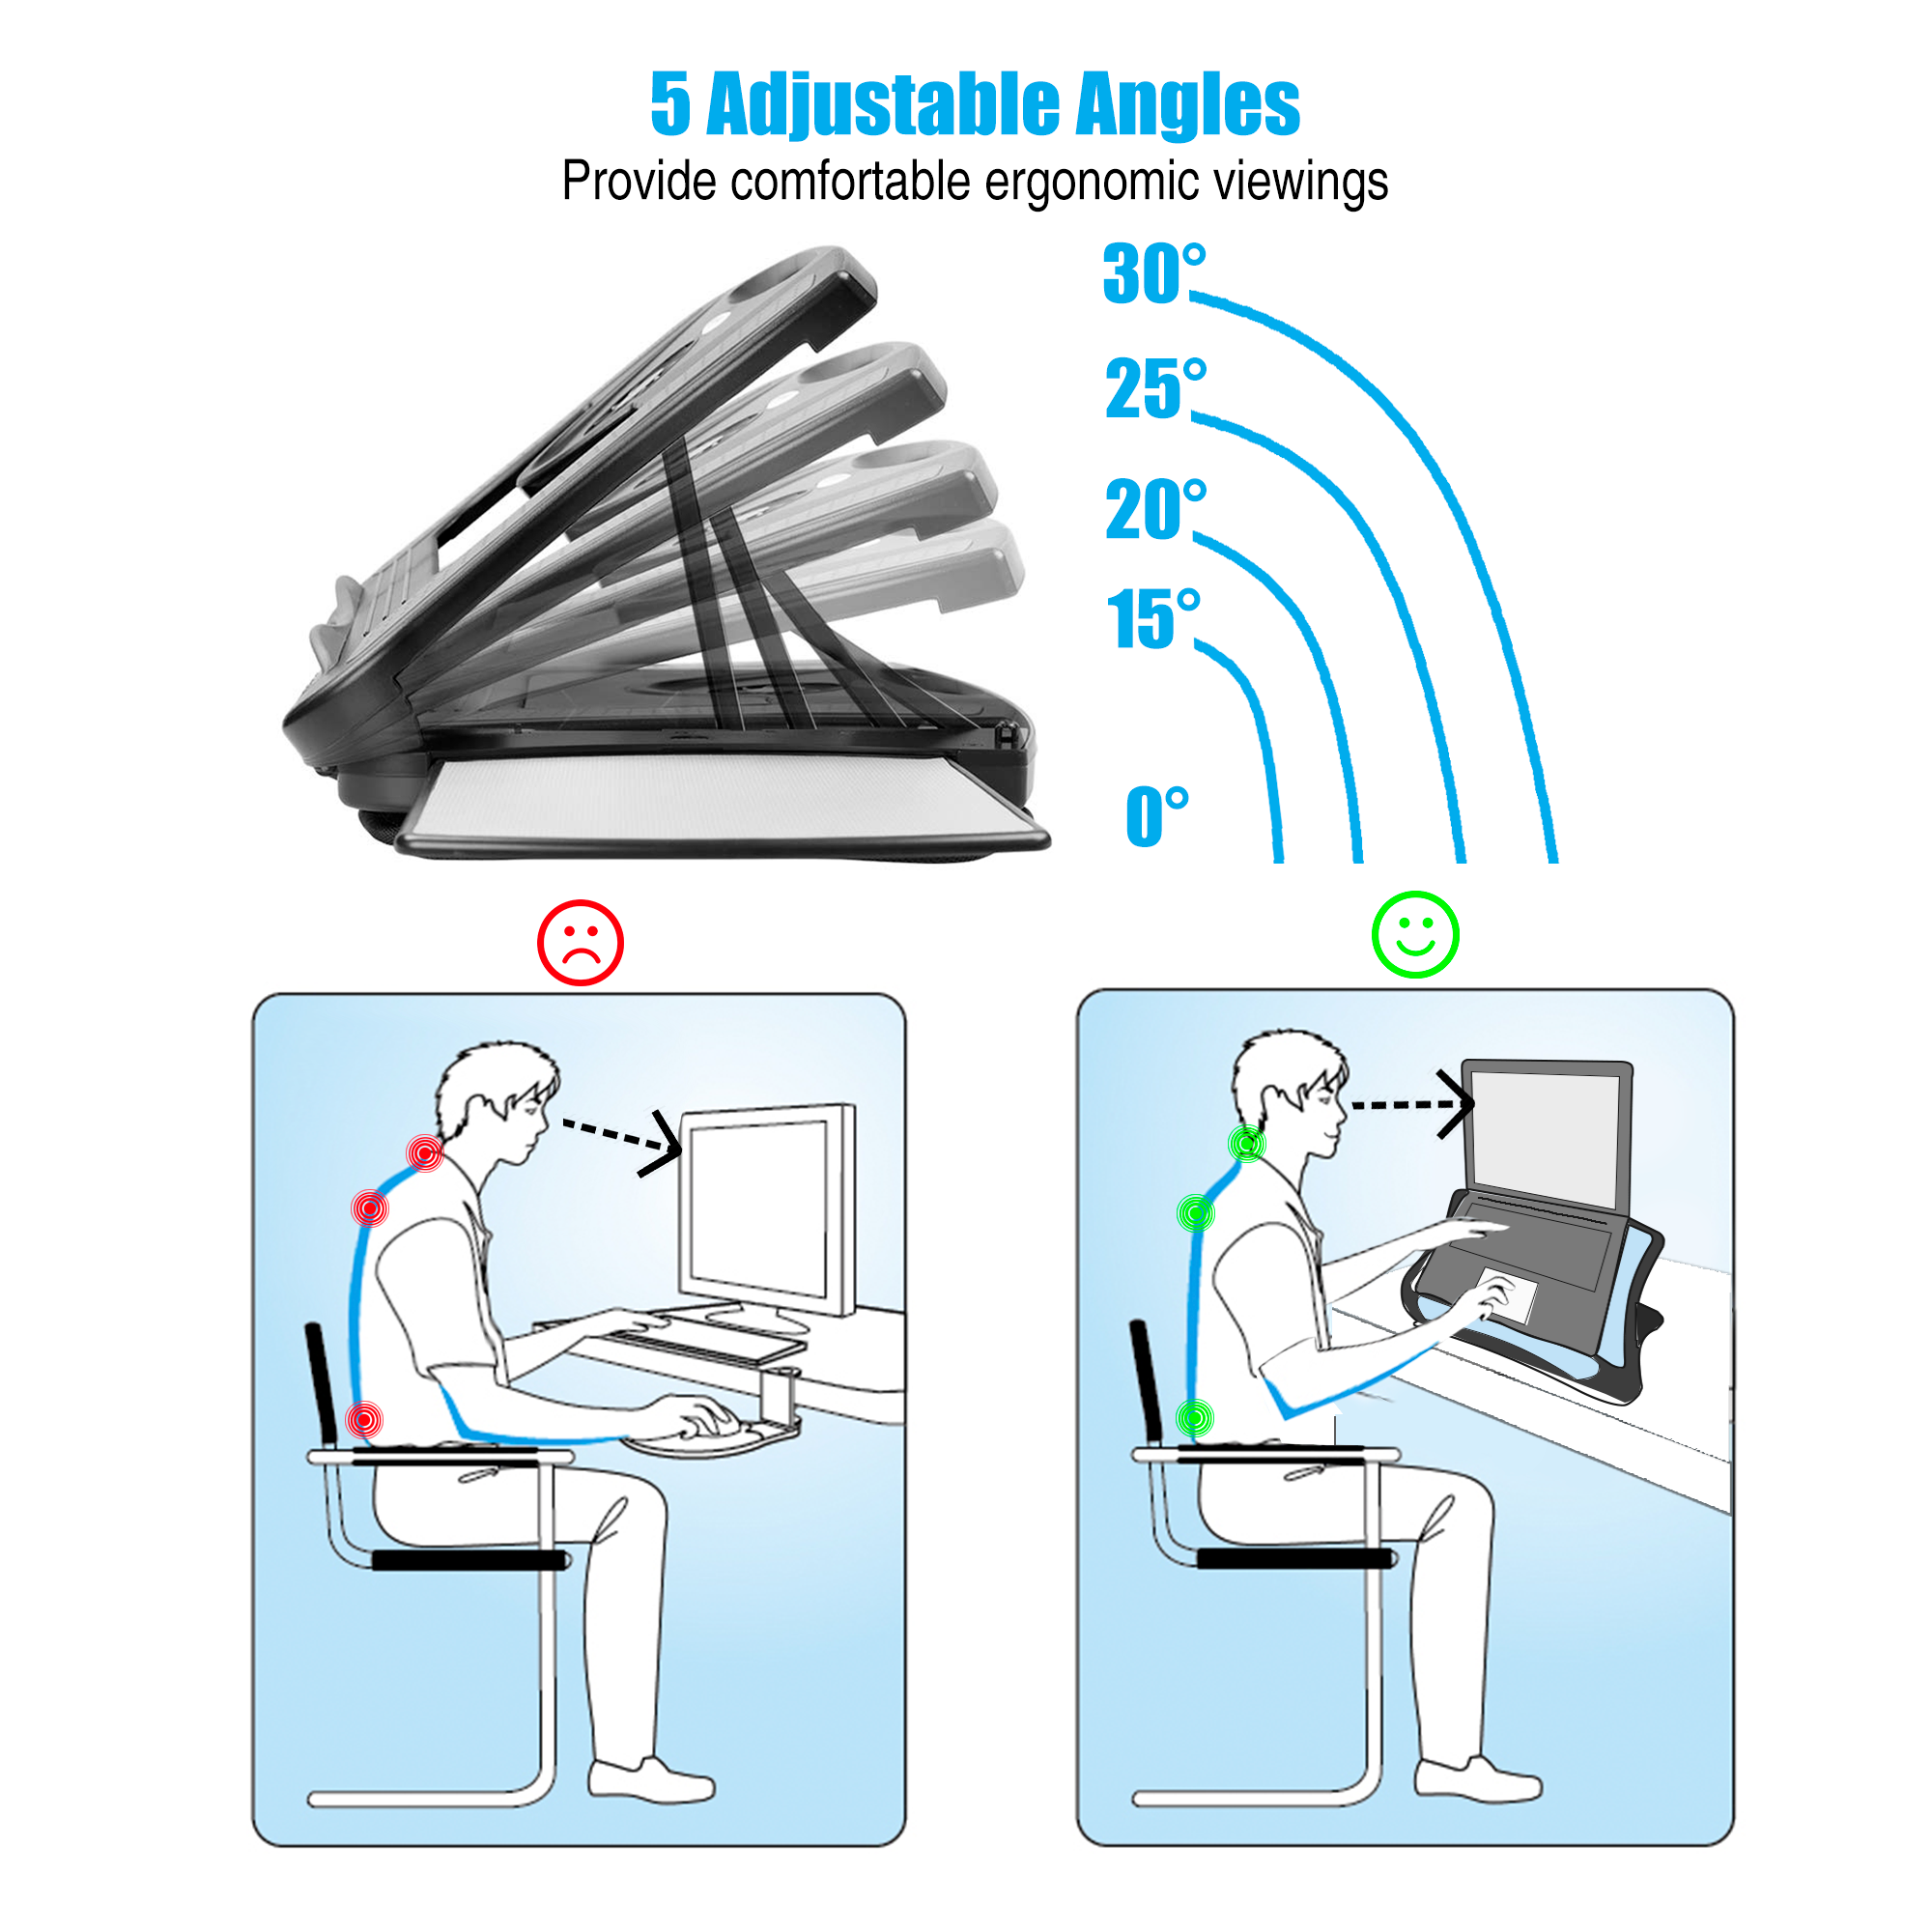 MAX SMART Laptop Lap Desk with Adjustable Angles, Detachable Mouse Pad, USB Fan, and Cushion - image 2 of 7